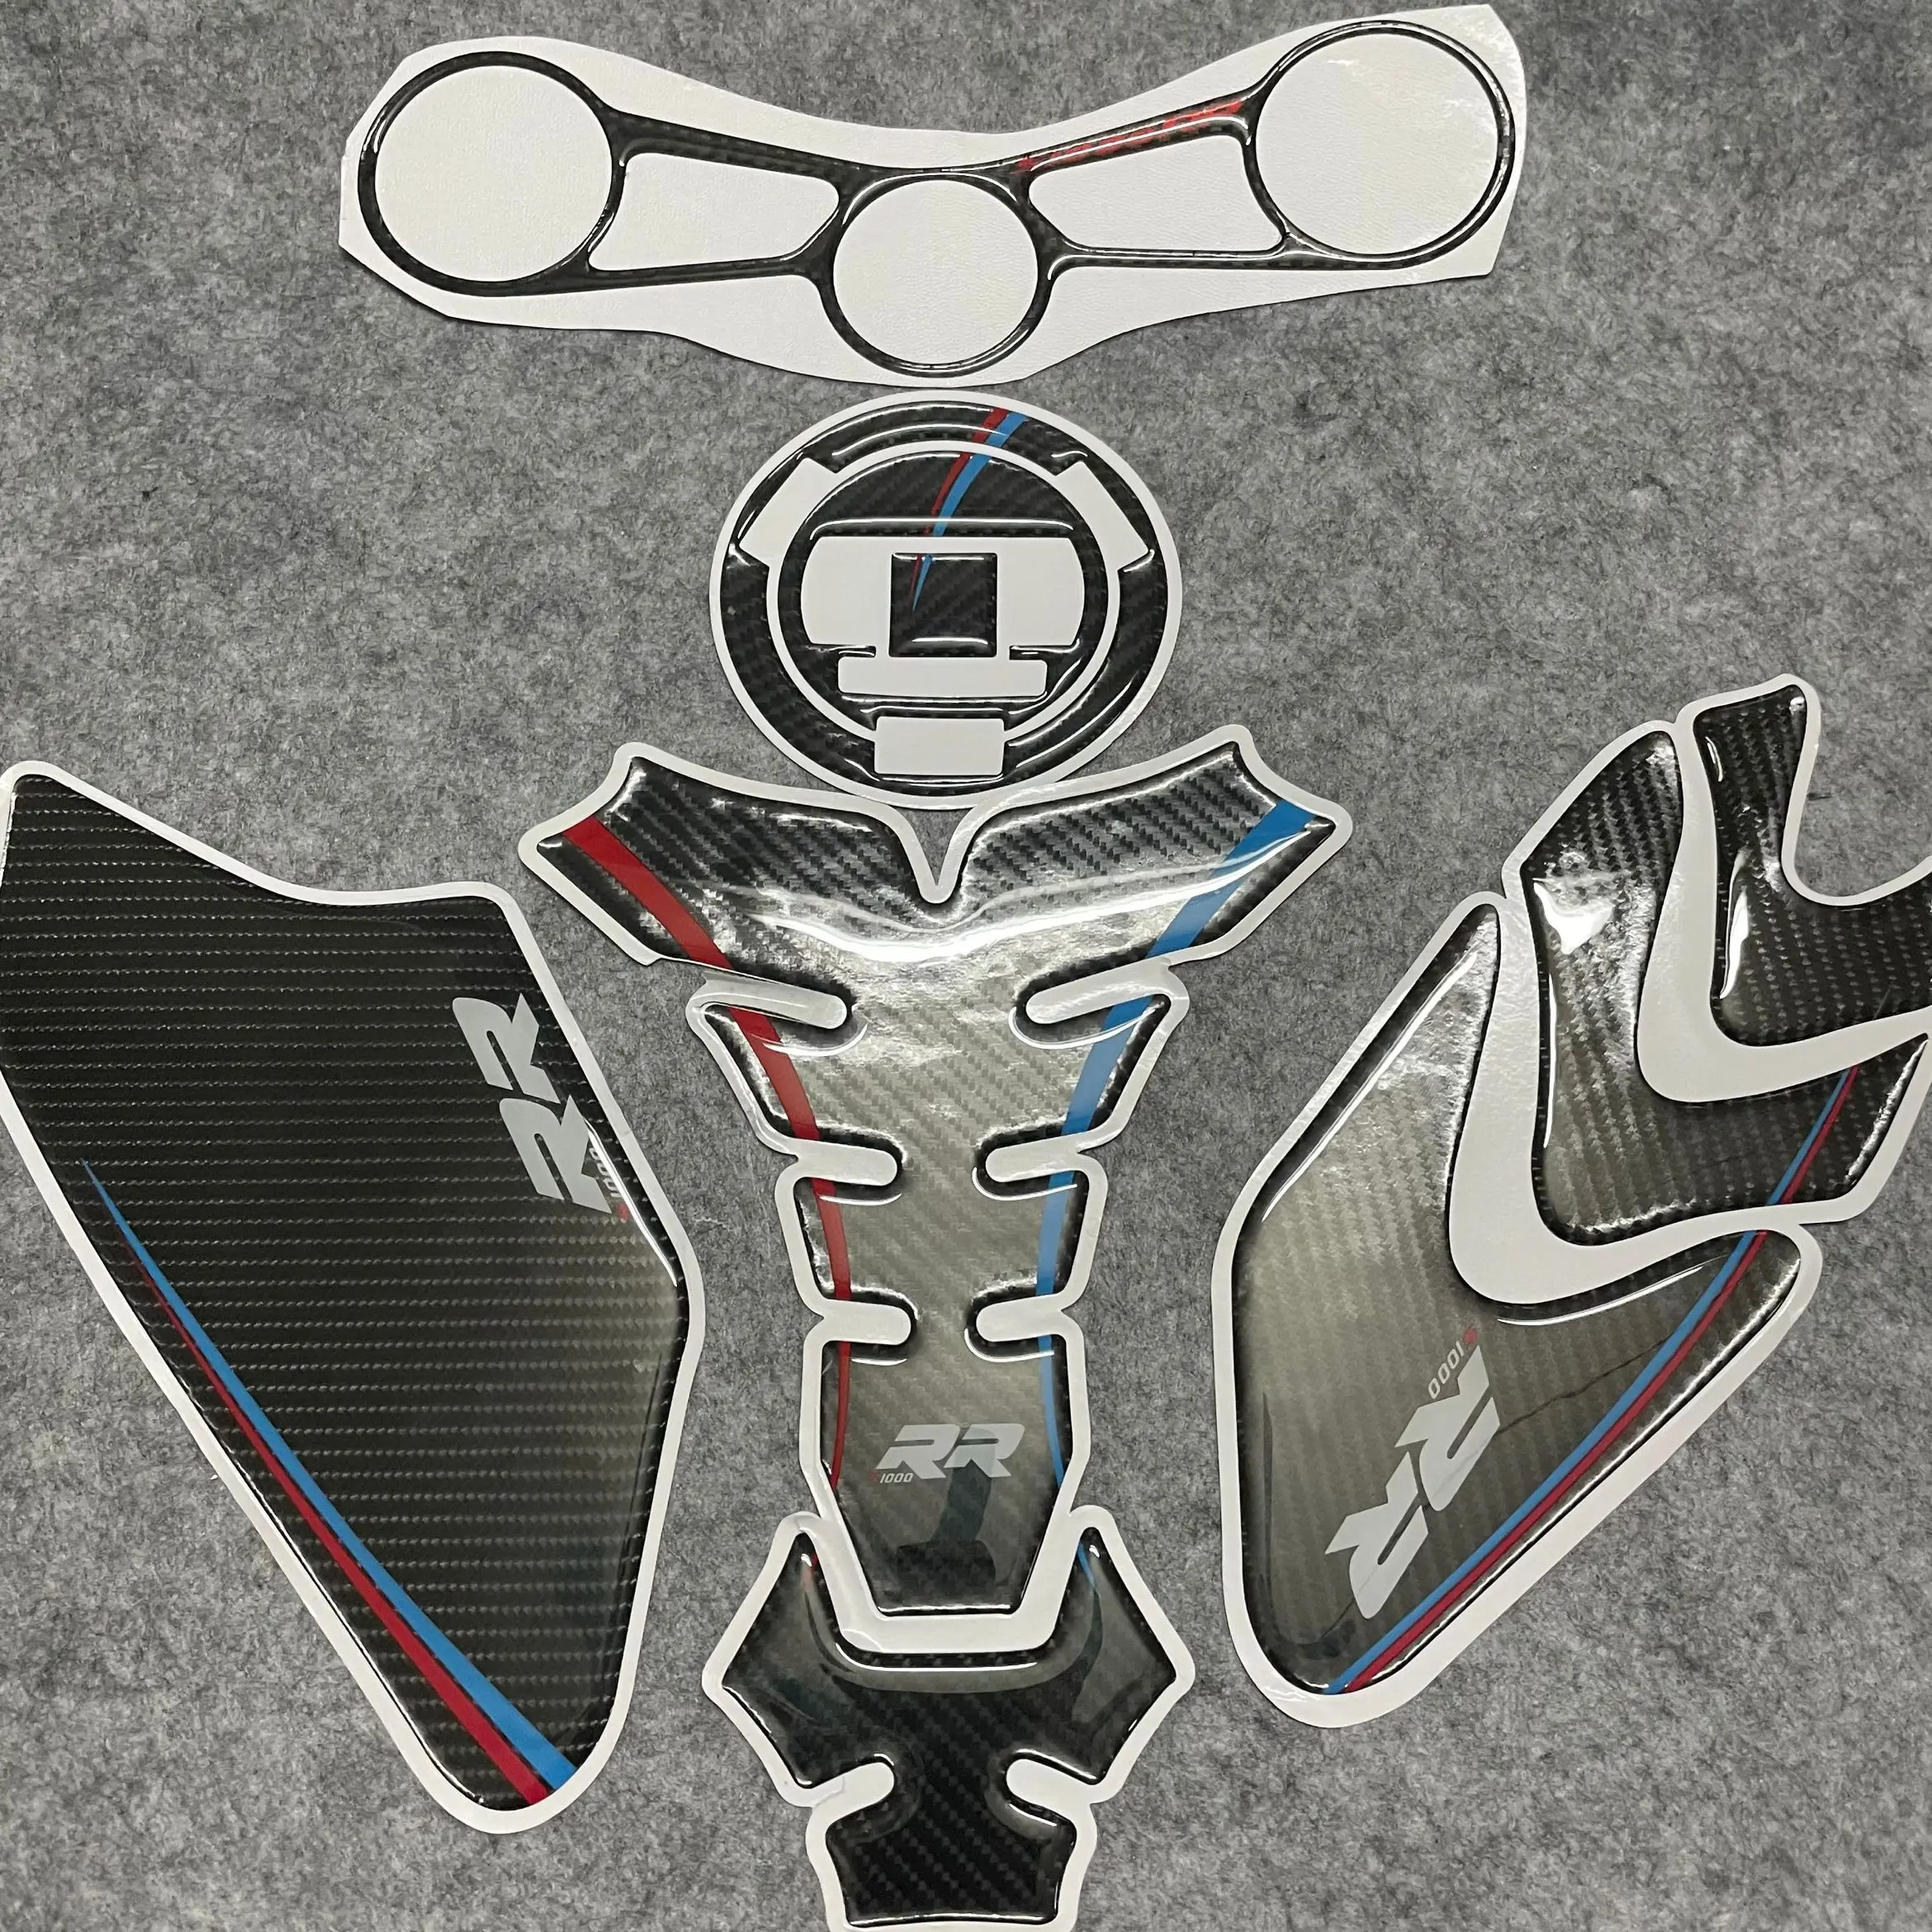 motorcycle Upper Triple Yoke Cover Protector Decal sticker Tank Cap Cover Pad sticker Fuel Tank Sticker for BMW S1000RR 15-20 reflective motorcycle side strip fender body alien head fairing upper sticker fuel tank decal waterproof for s1000rr hp4